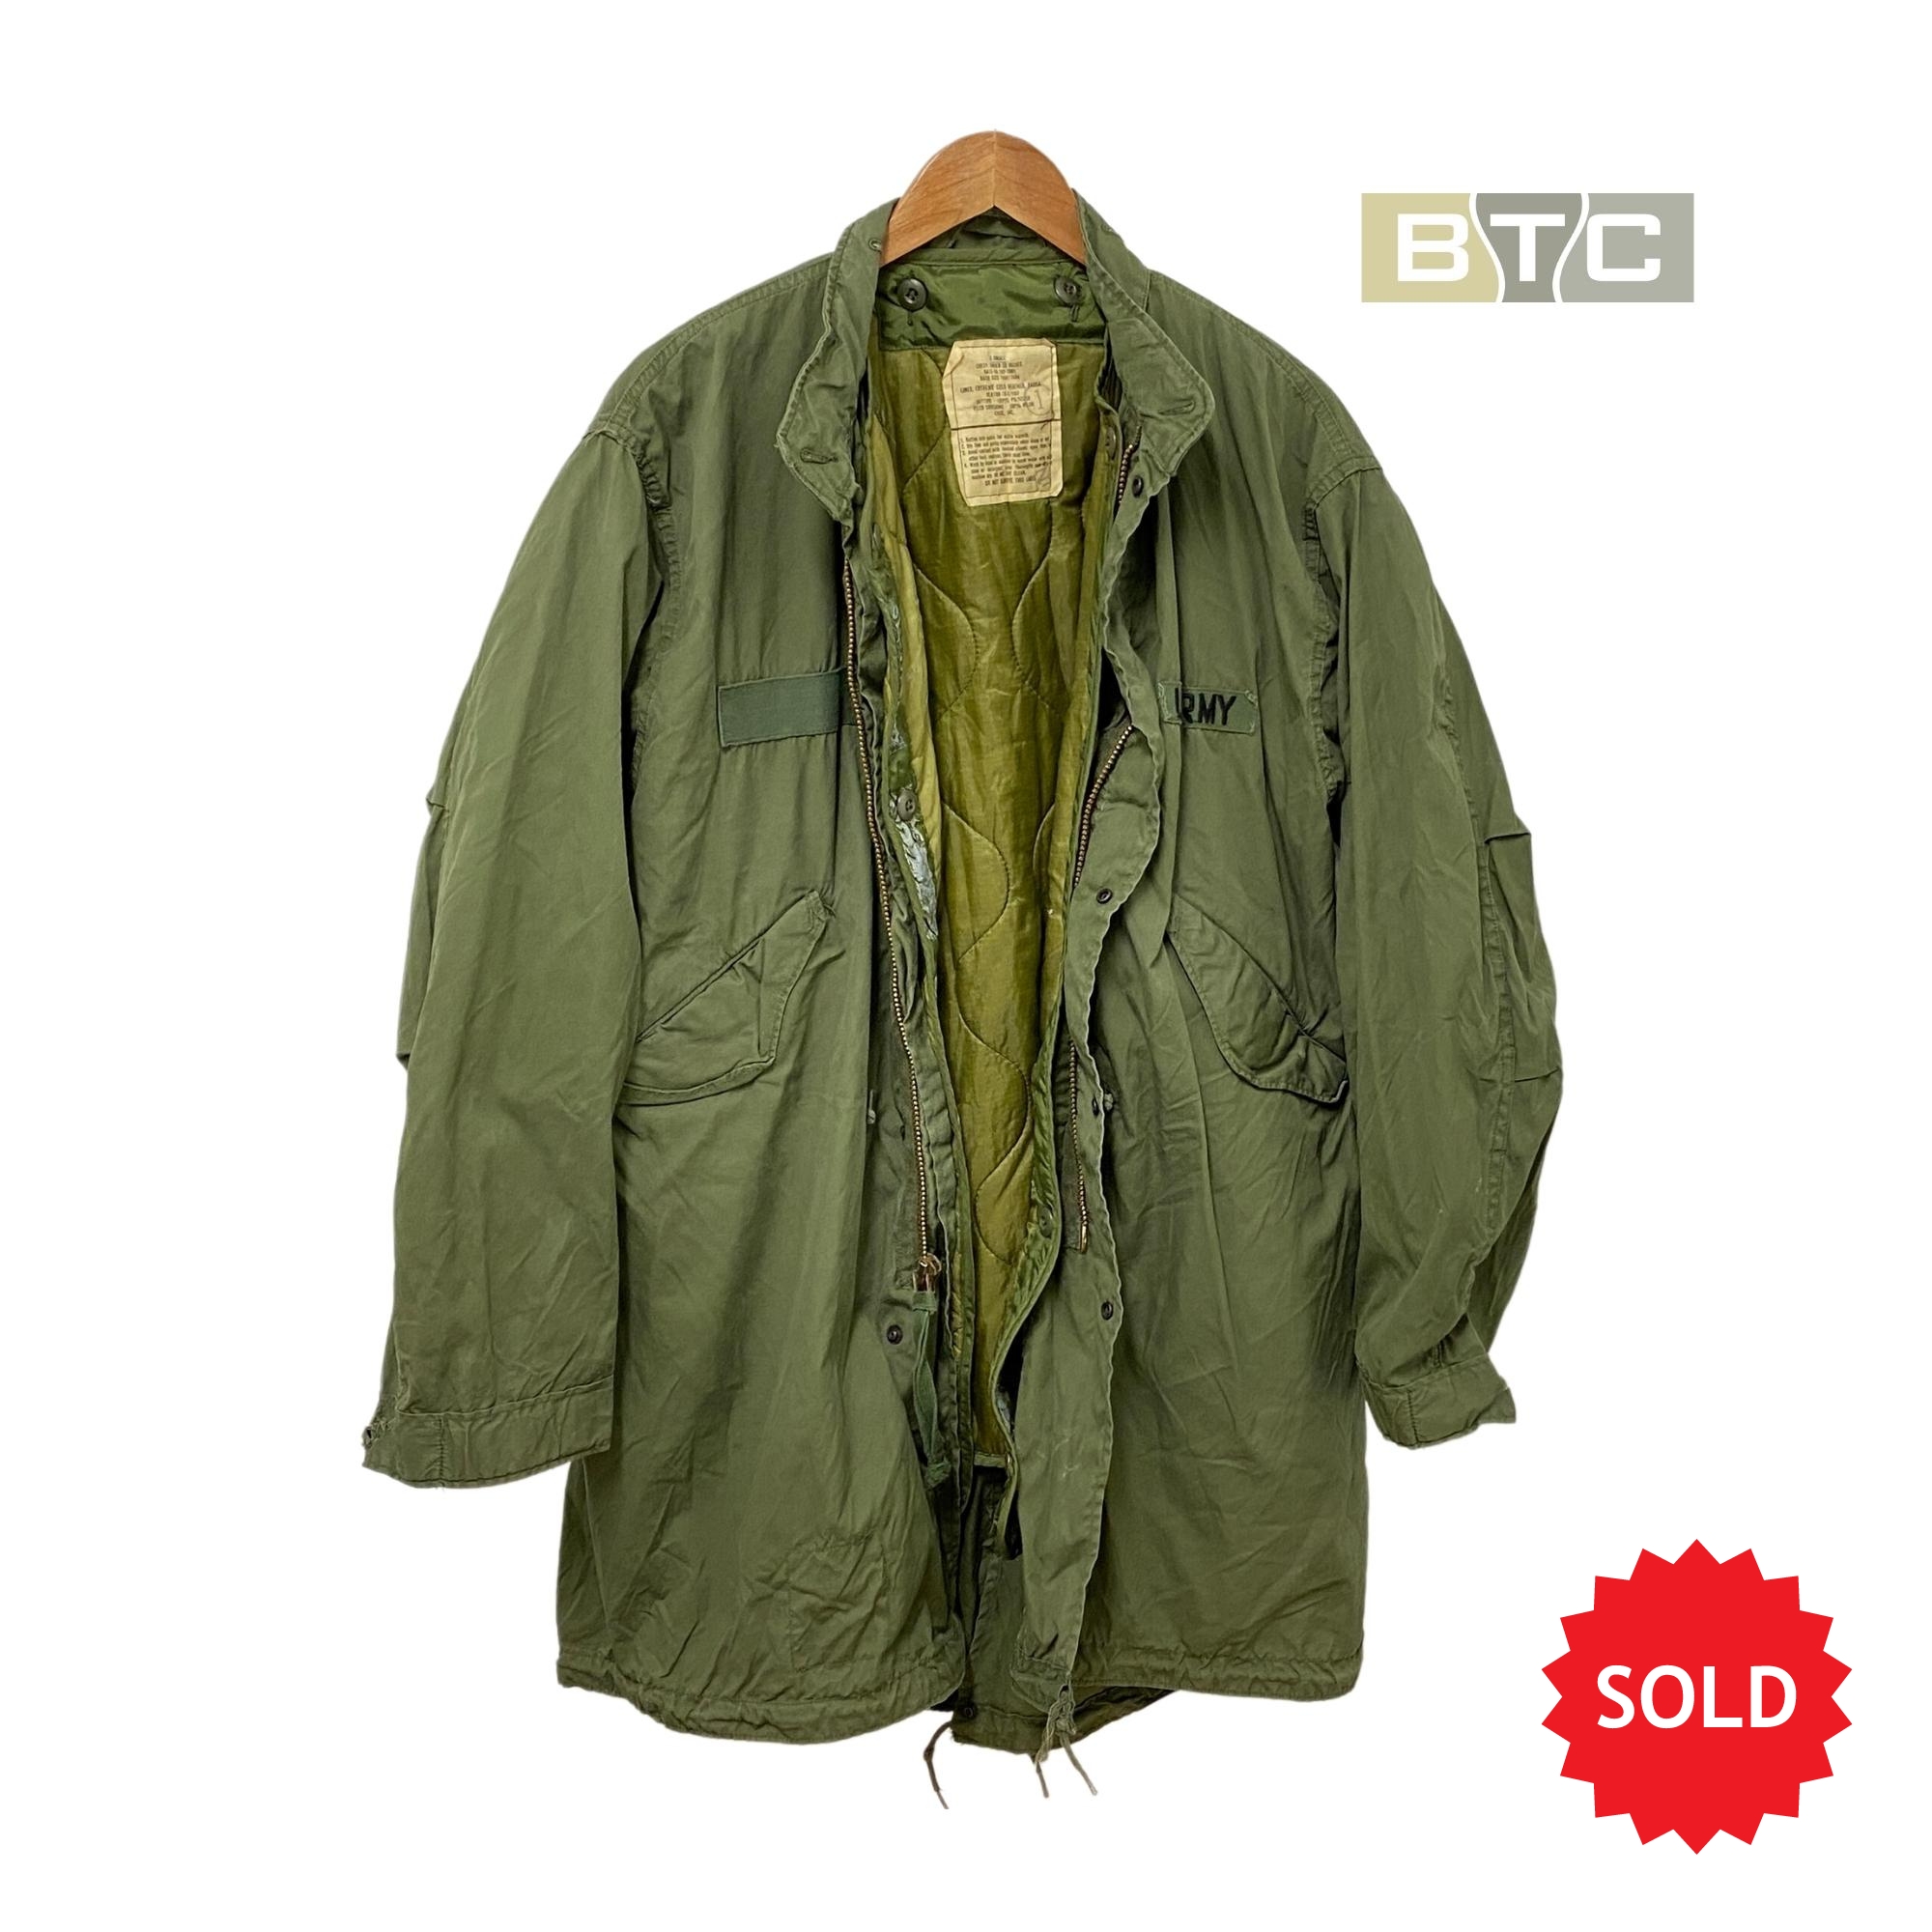 US M65 Fishtail Parka with Liner - Size Ex/Small-Regular - 1972